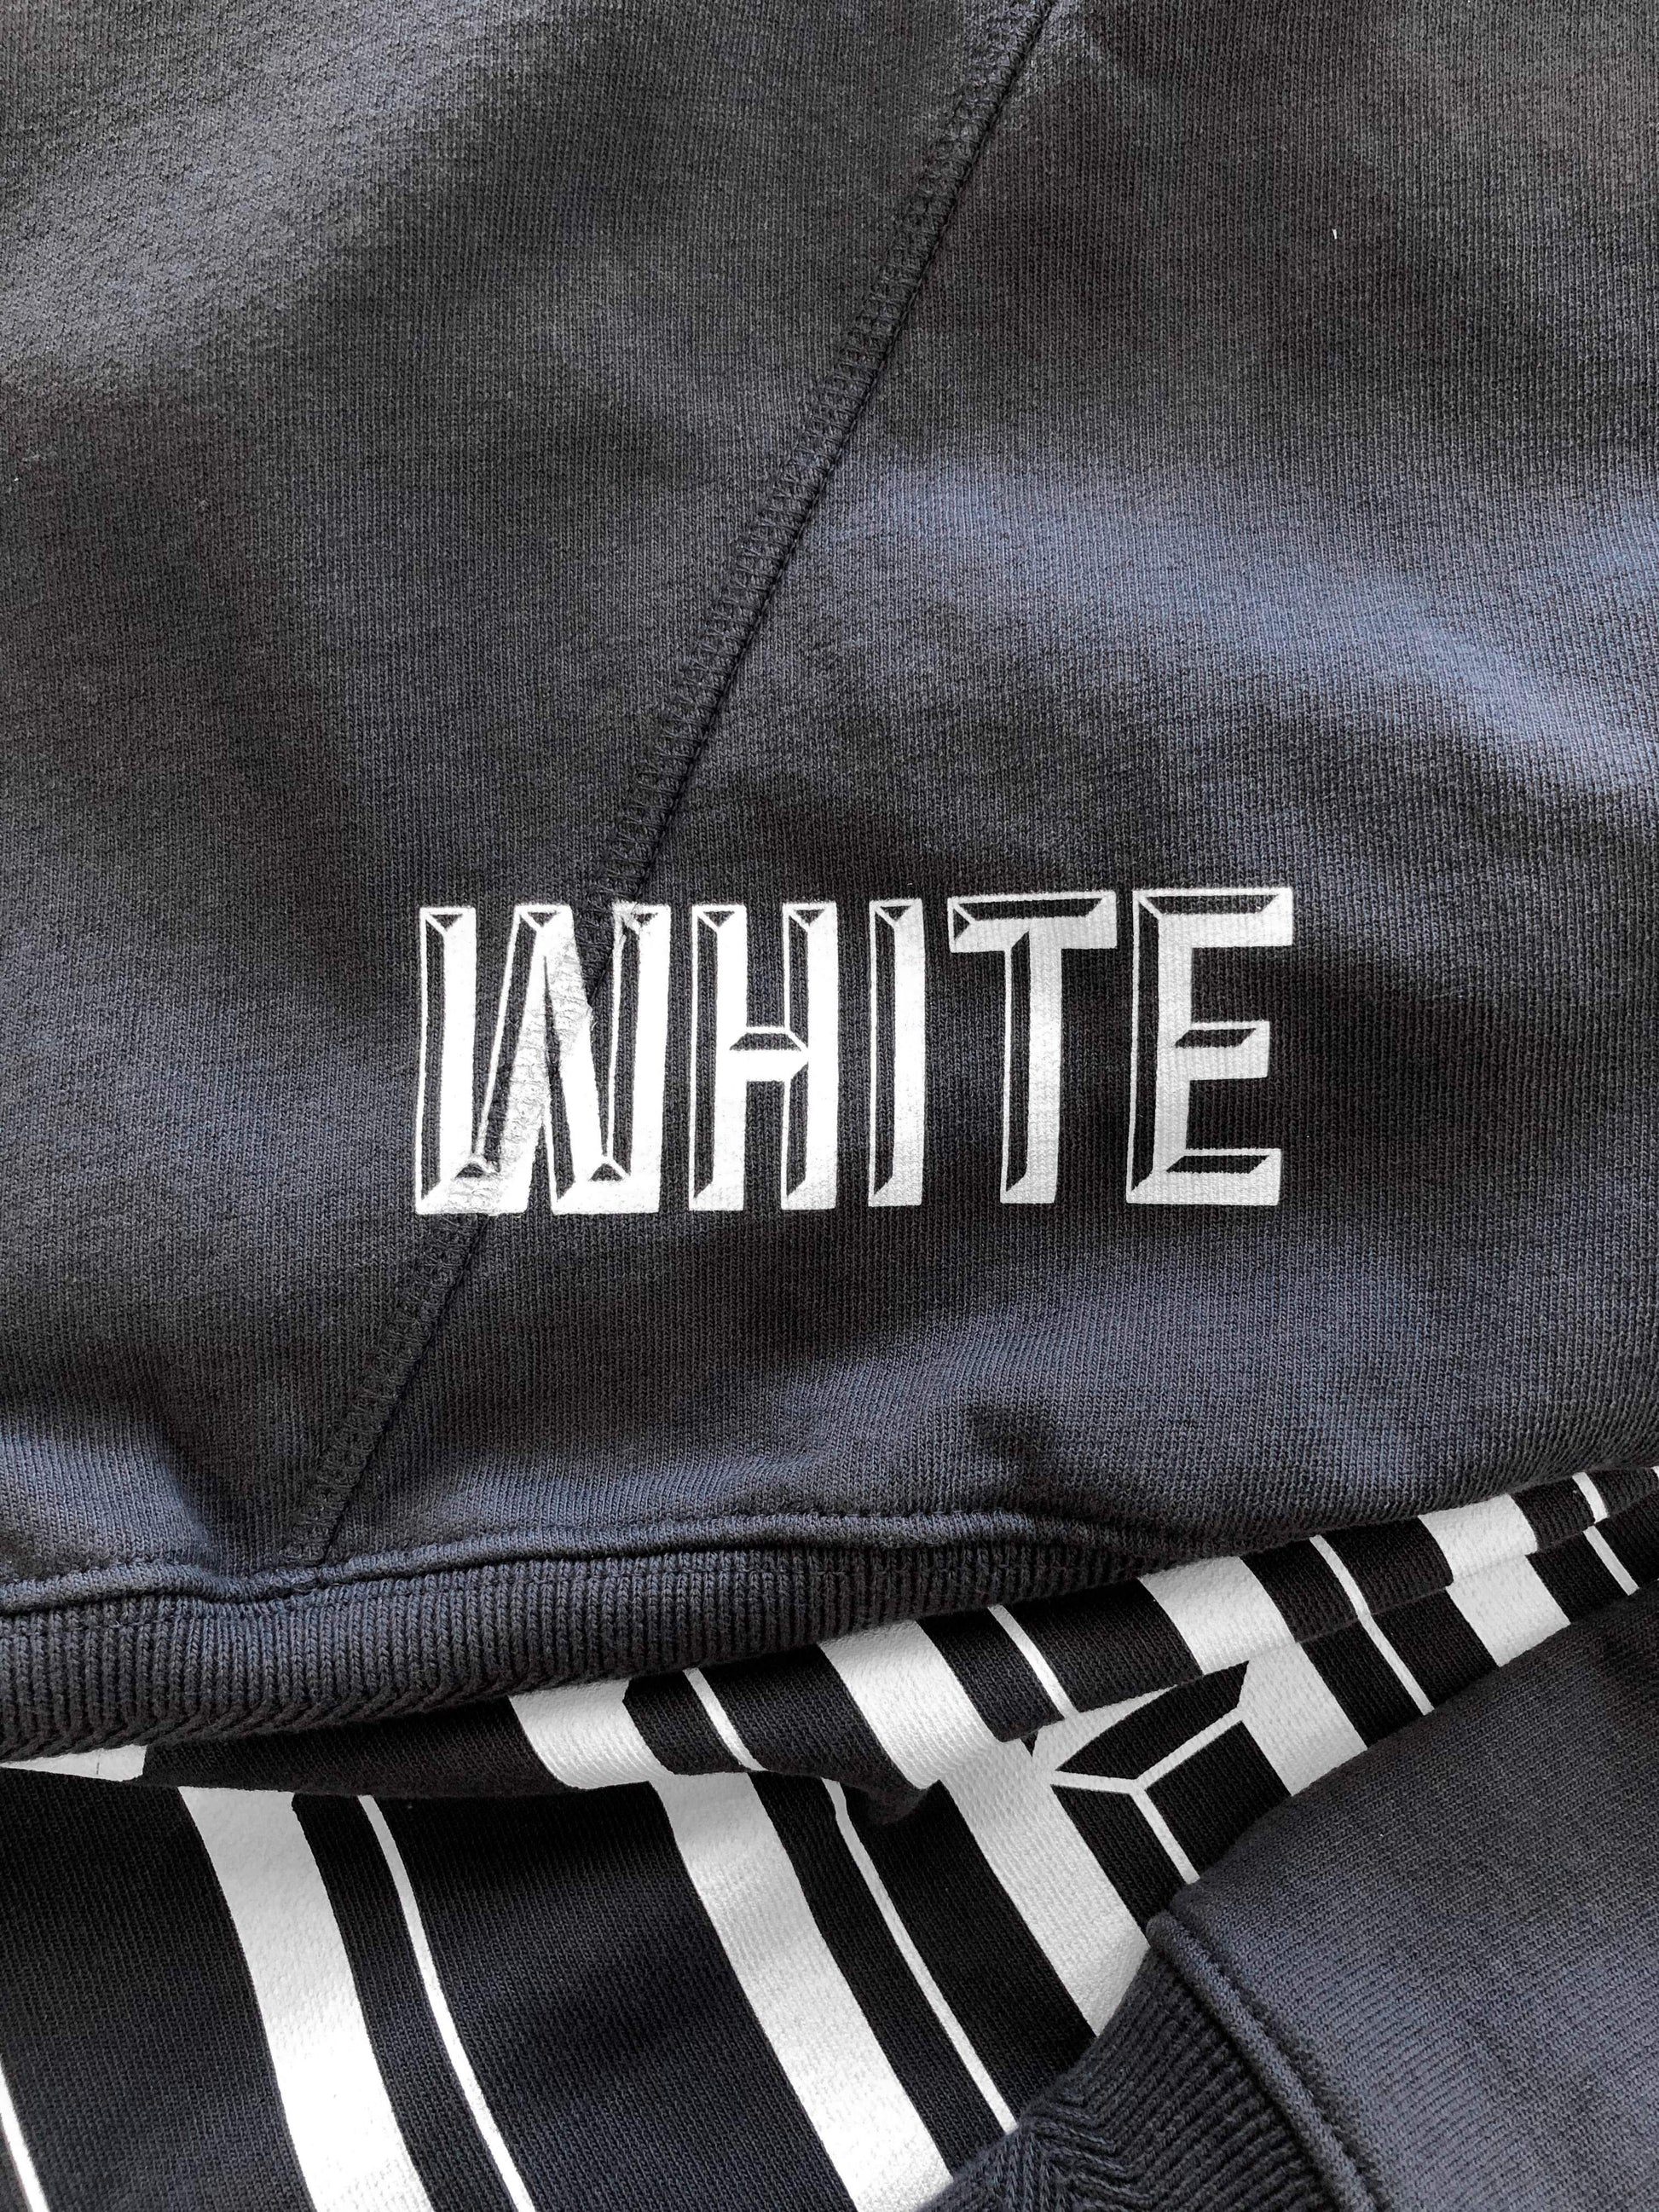 Off White 3D White Sweatshirt SS18 Collection